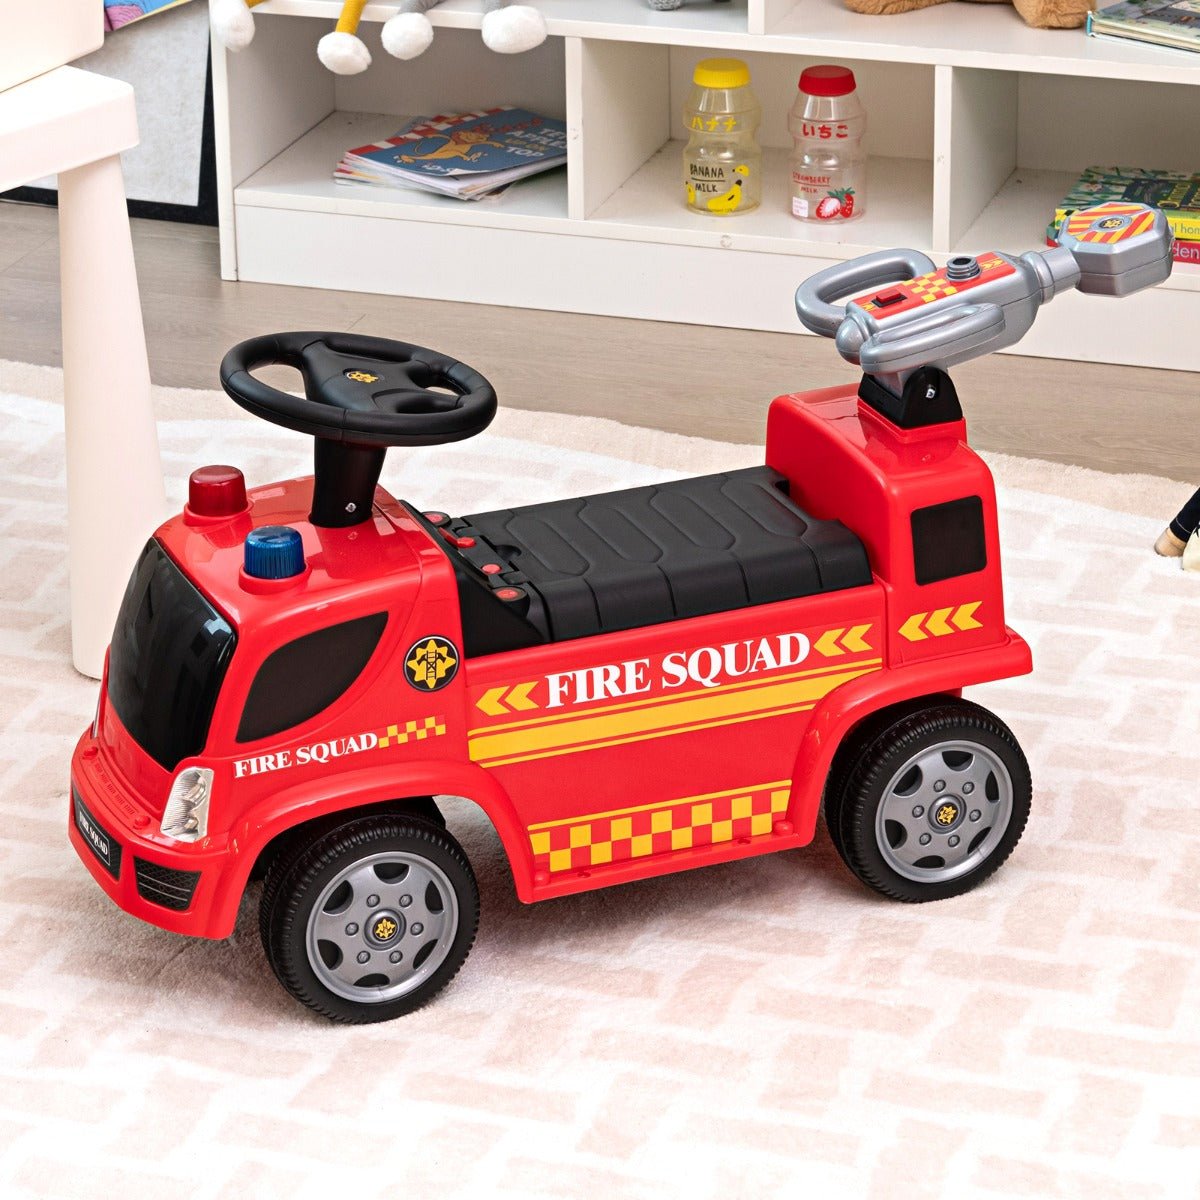 Bubbling Adventures: Kids Fire Engine Truck Ride On with Bubble Function